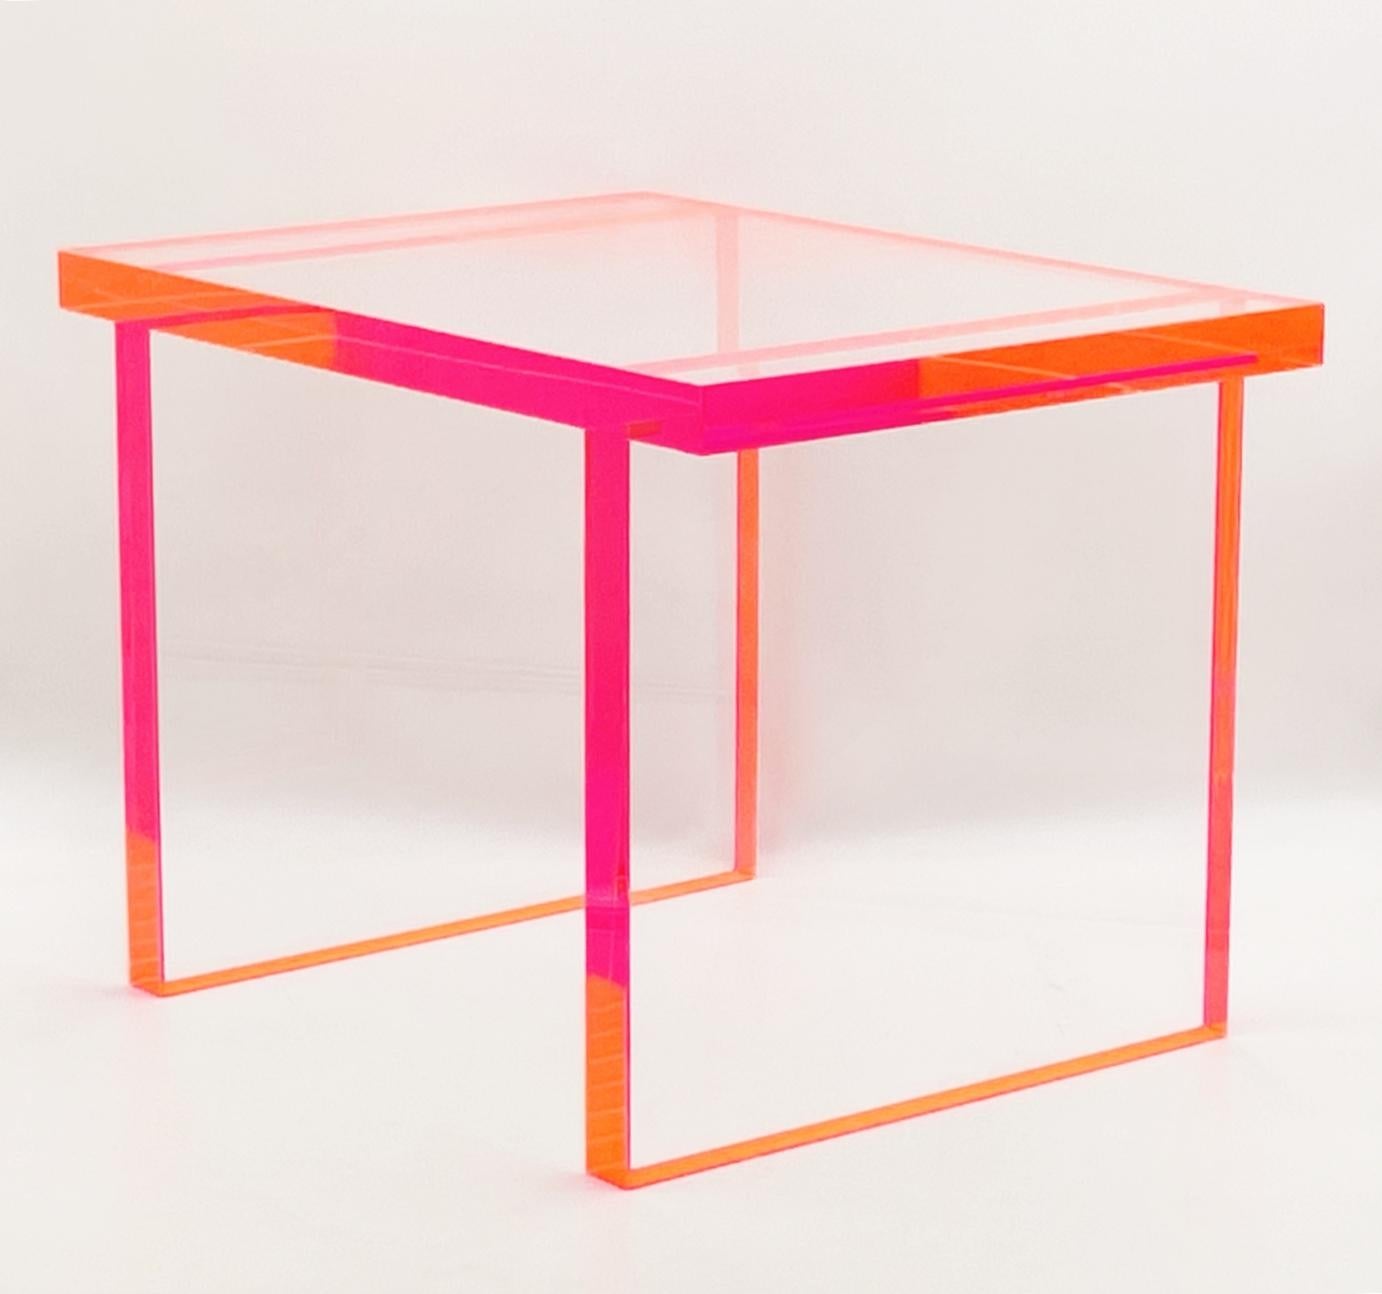 
Introducing the Fluorescent Pink & Clear Lucite Bench by Amparo Calderon Tapia - a stunning addition to any modern furniture collection. Featuring a bold mix of fluorescent pink and clear Lucite, this bench is a true statement piece that will add a